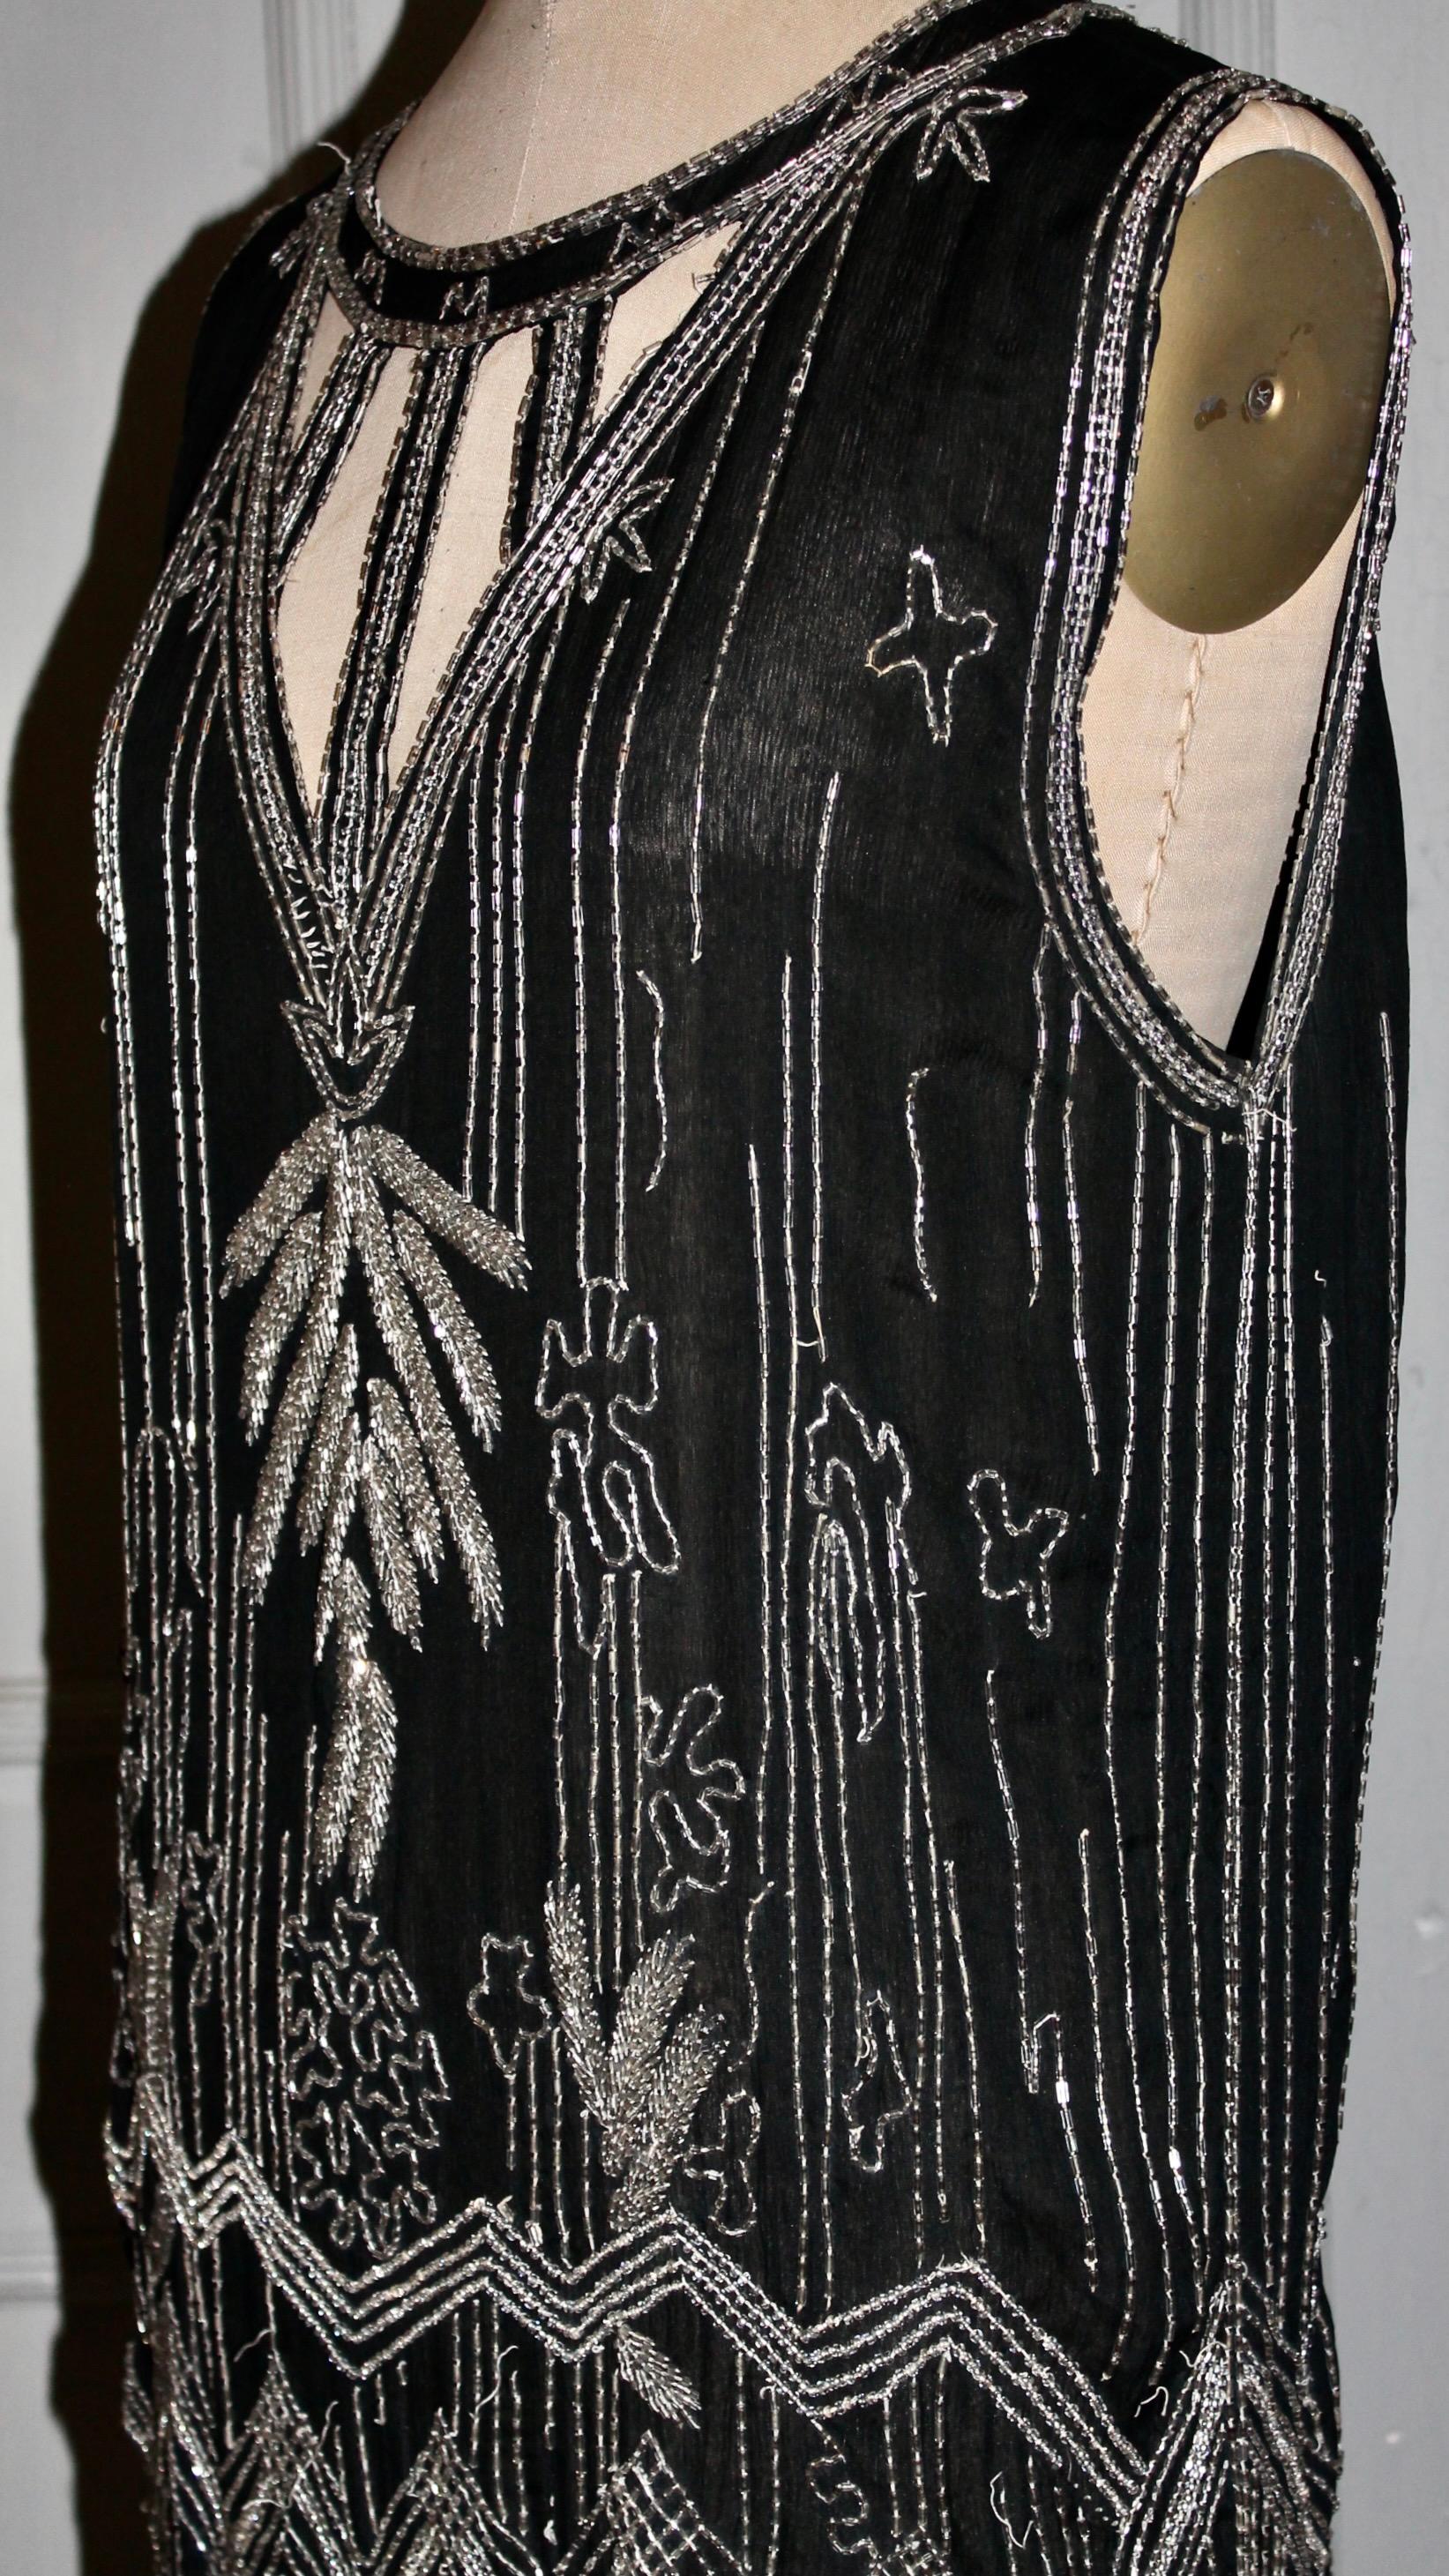 Offering an Extraordinary Art Deco 1920's Couture Black Silk Crepe Beaded 'Flapper' Cocktail Dress. With extreme deco scalloped hem.